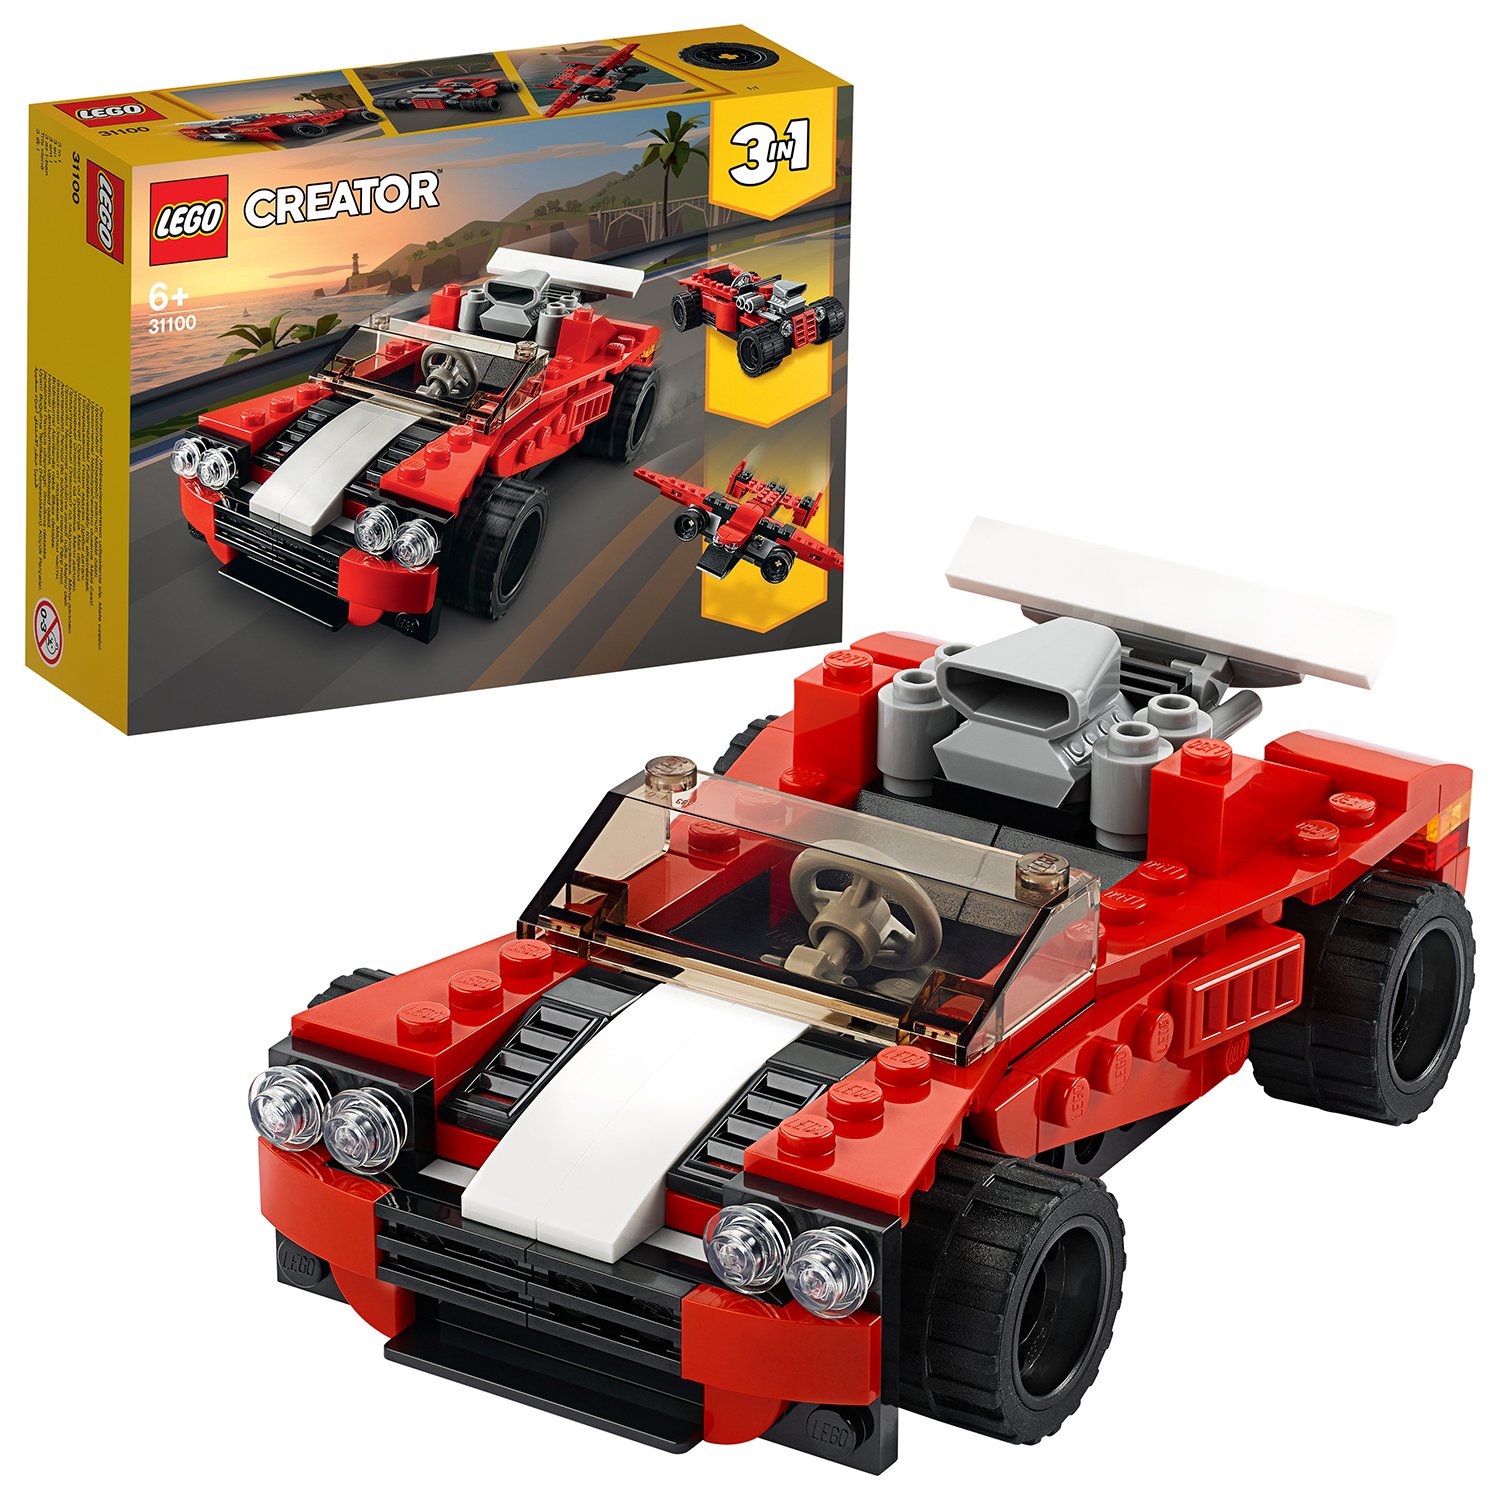 LEGO Creator 3in1 Sports Car Toy Set Review